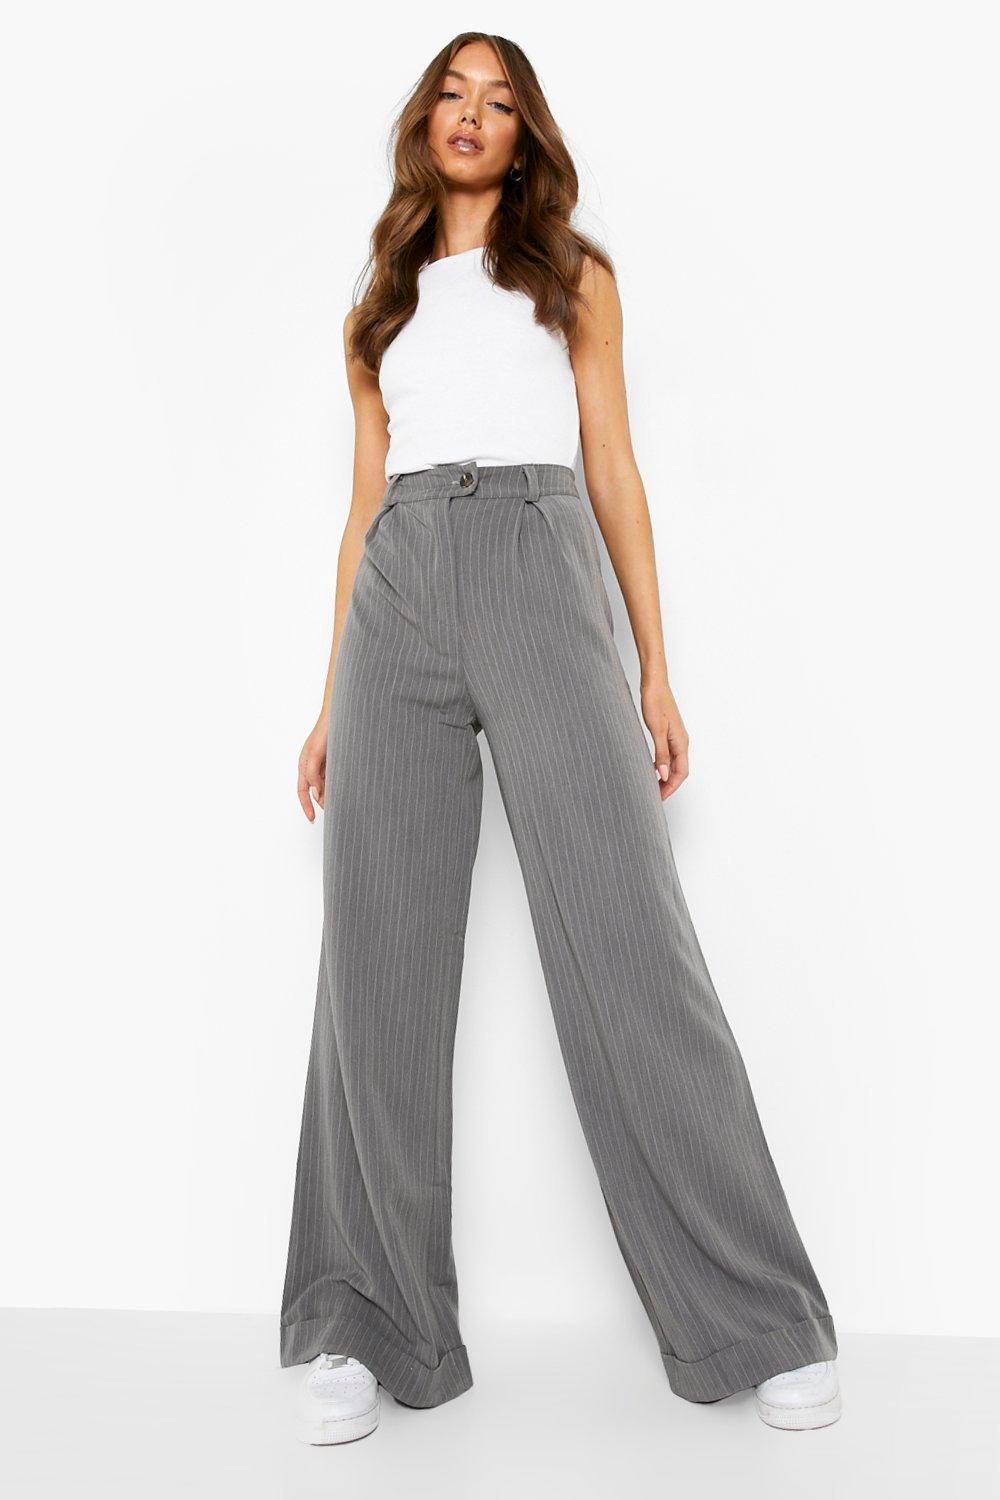 STYLING GREY WIDE-LEG TROUSERS FOR EVERY OCCASION